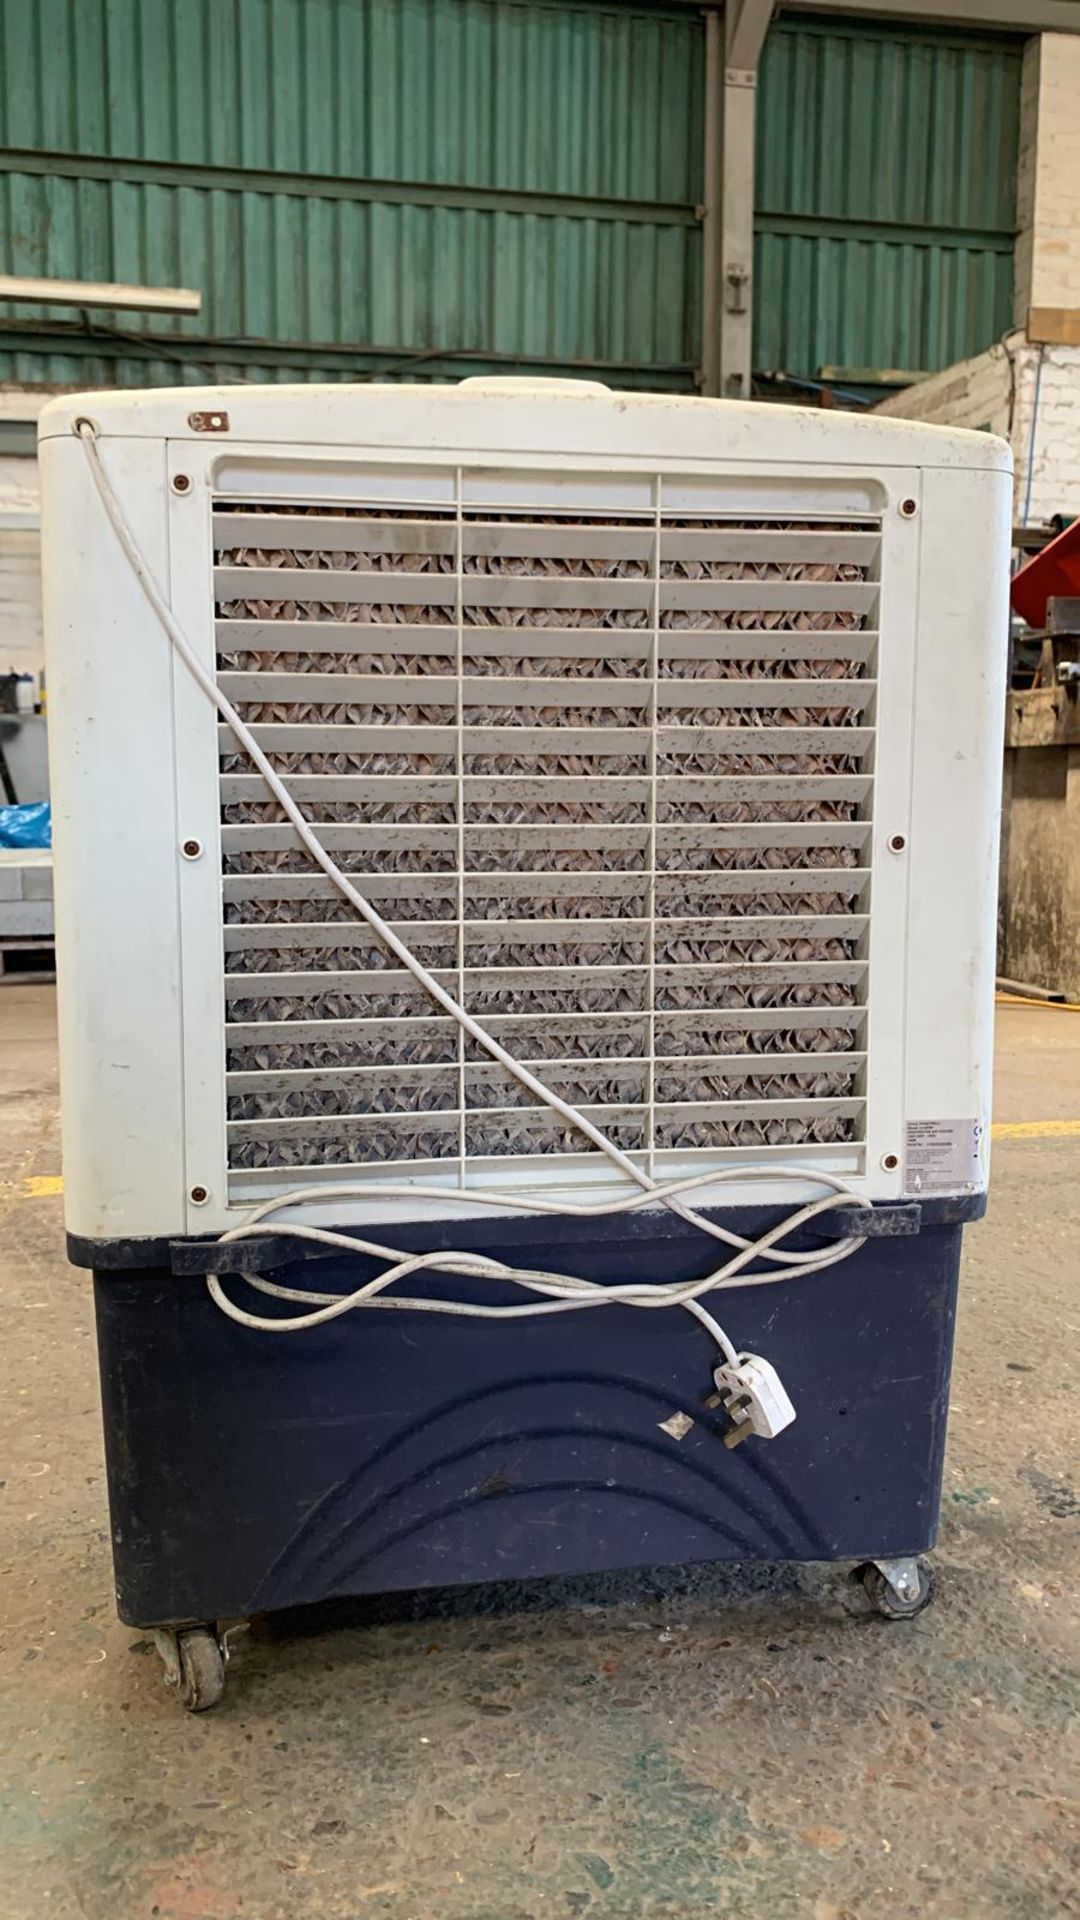 PORTABLE AIR CONDITIONER - WORKING - Image 2 of 2